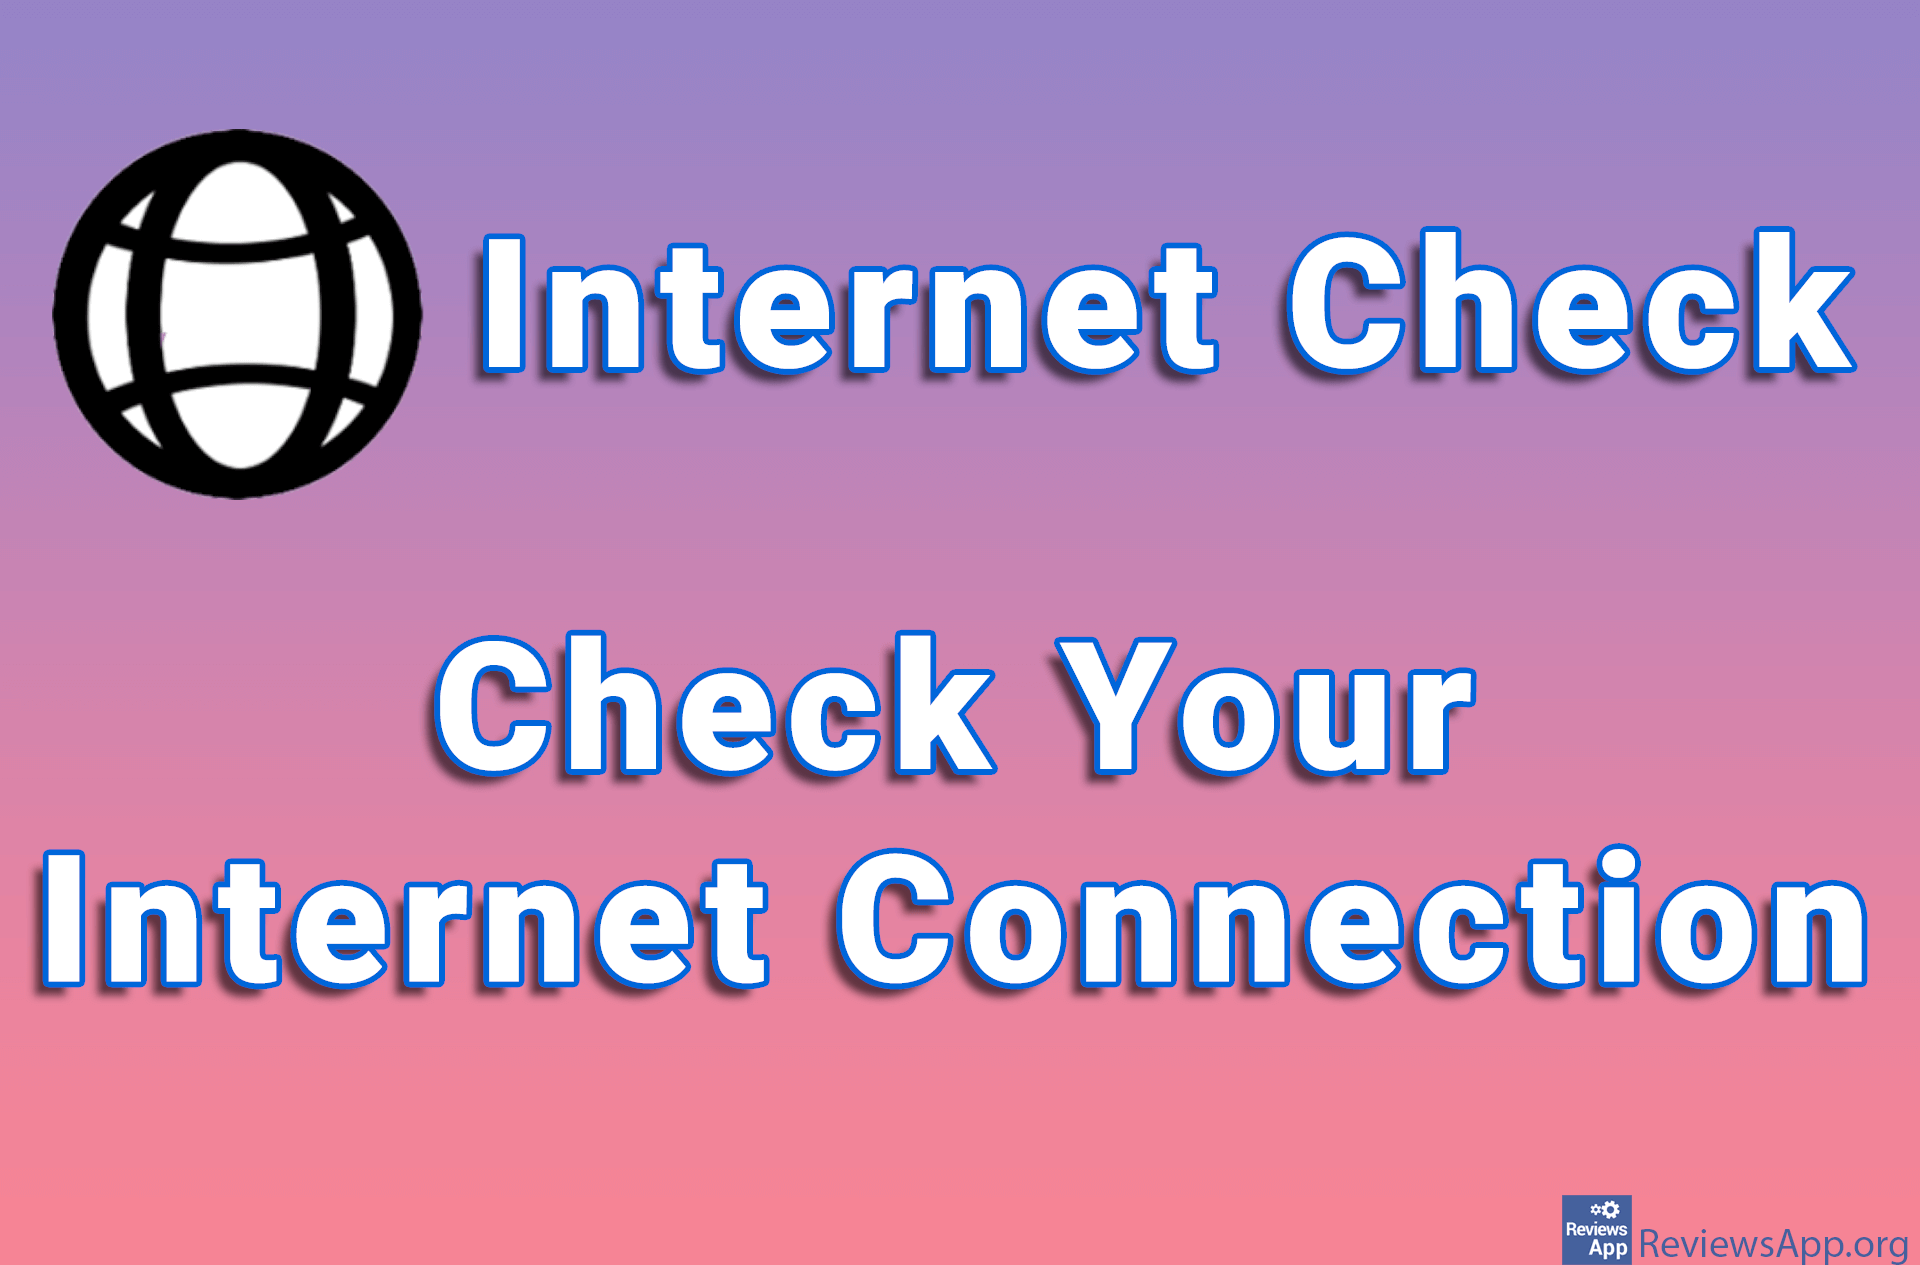 Internet Check – Check Your Internet Connection